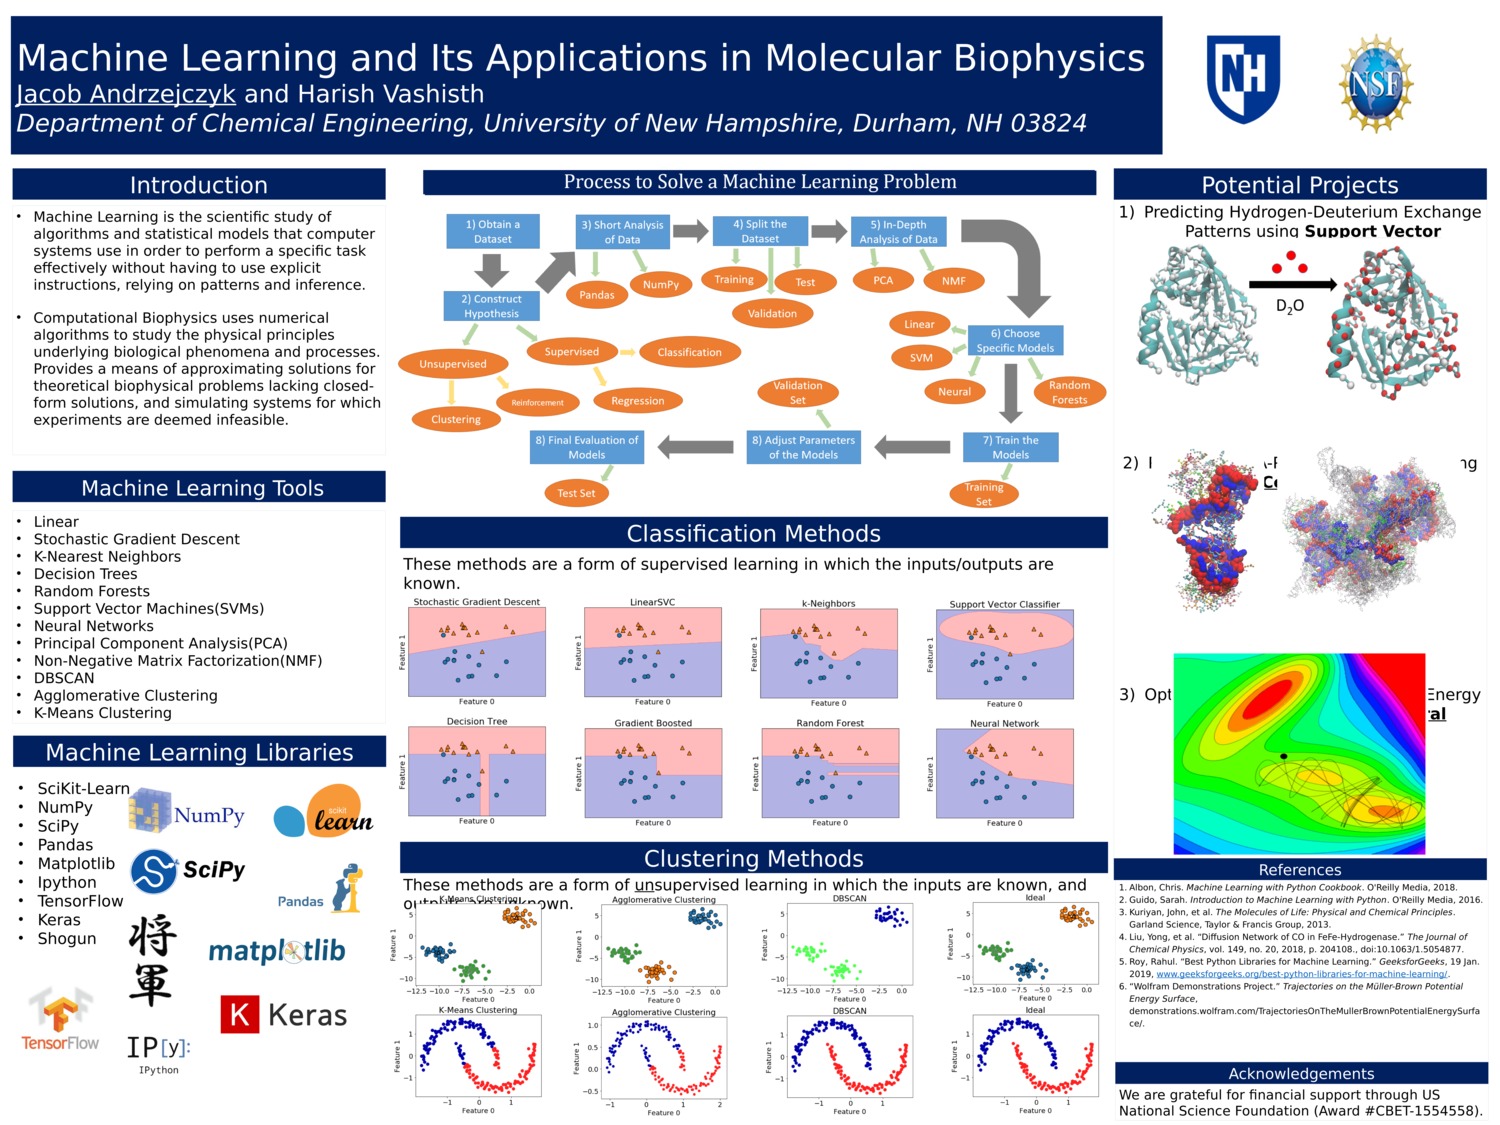 Machine Learning And Its Applications In Molecular Biophysics by joa1002